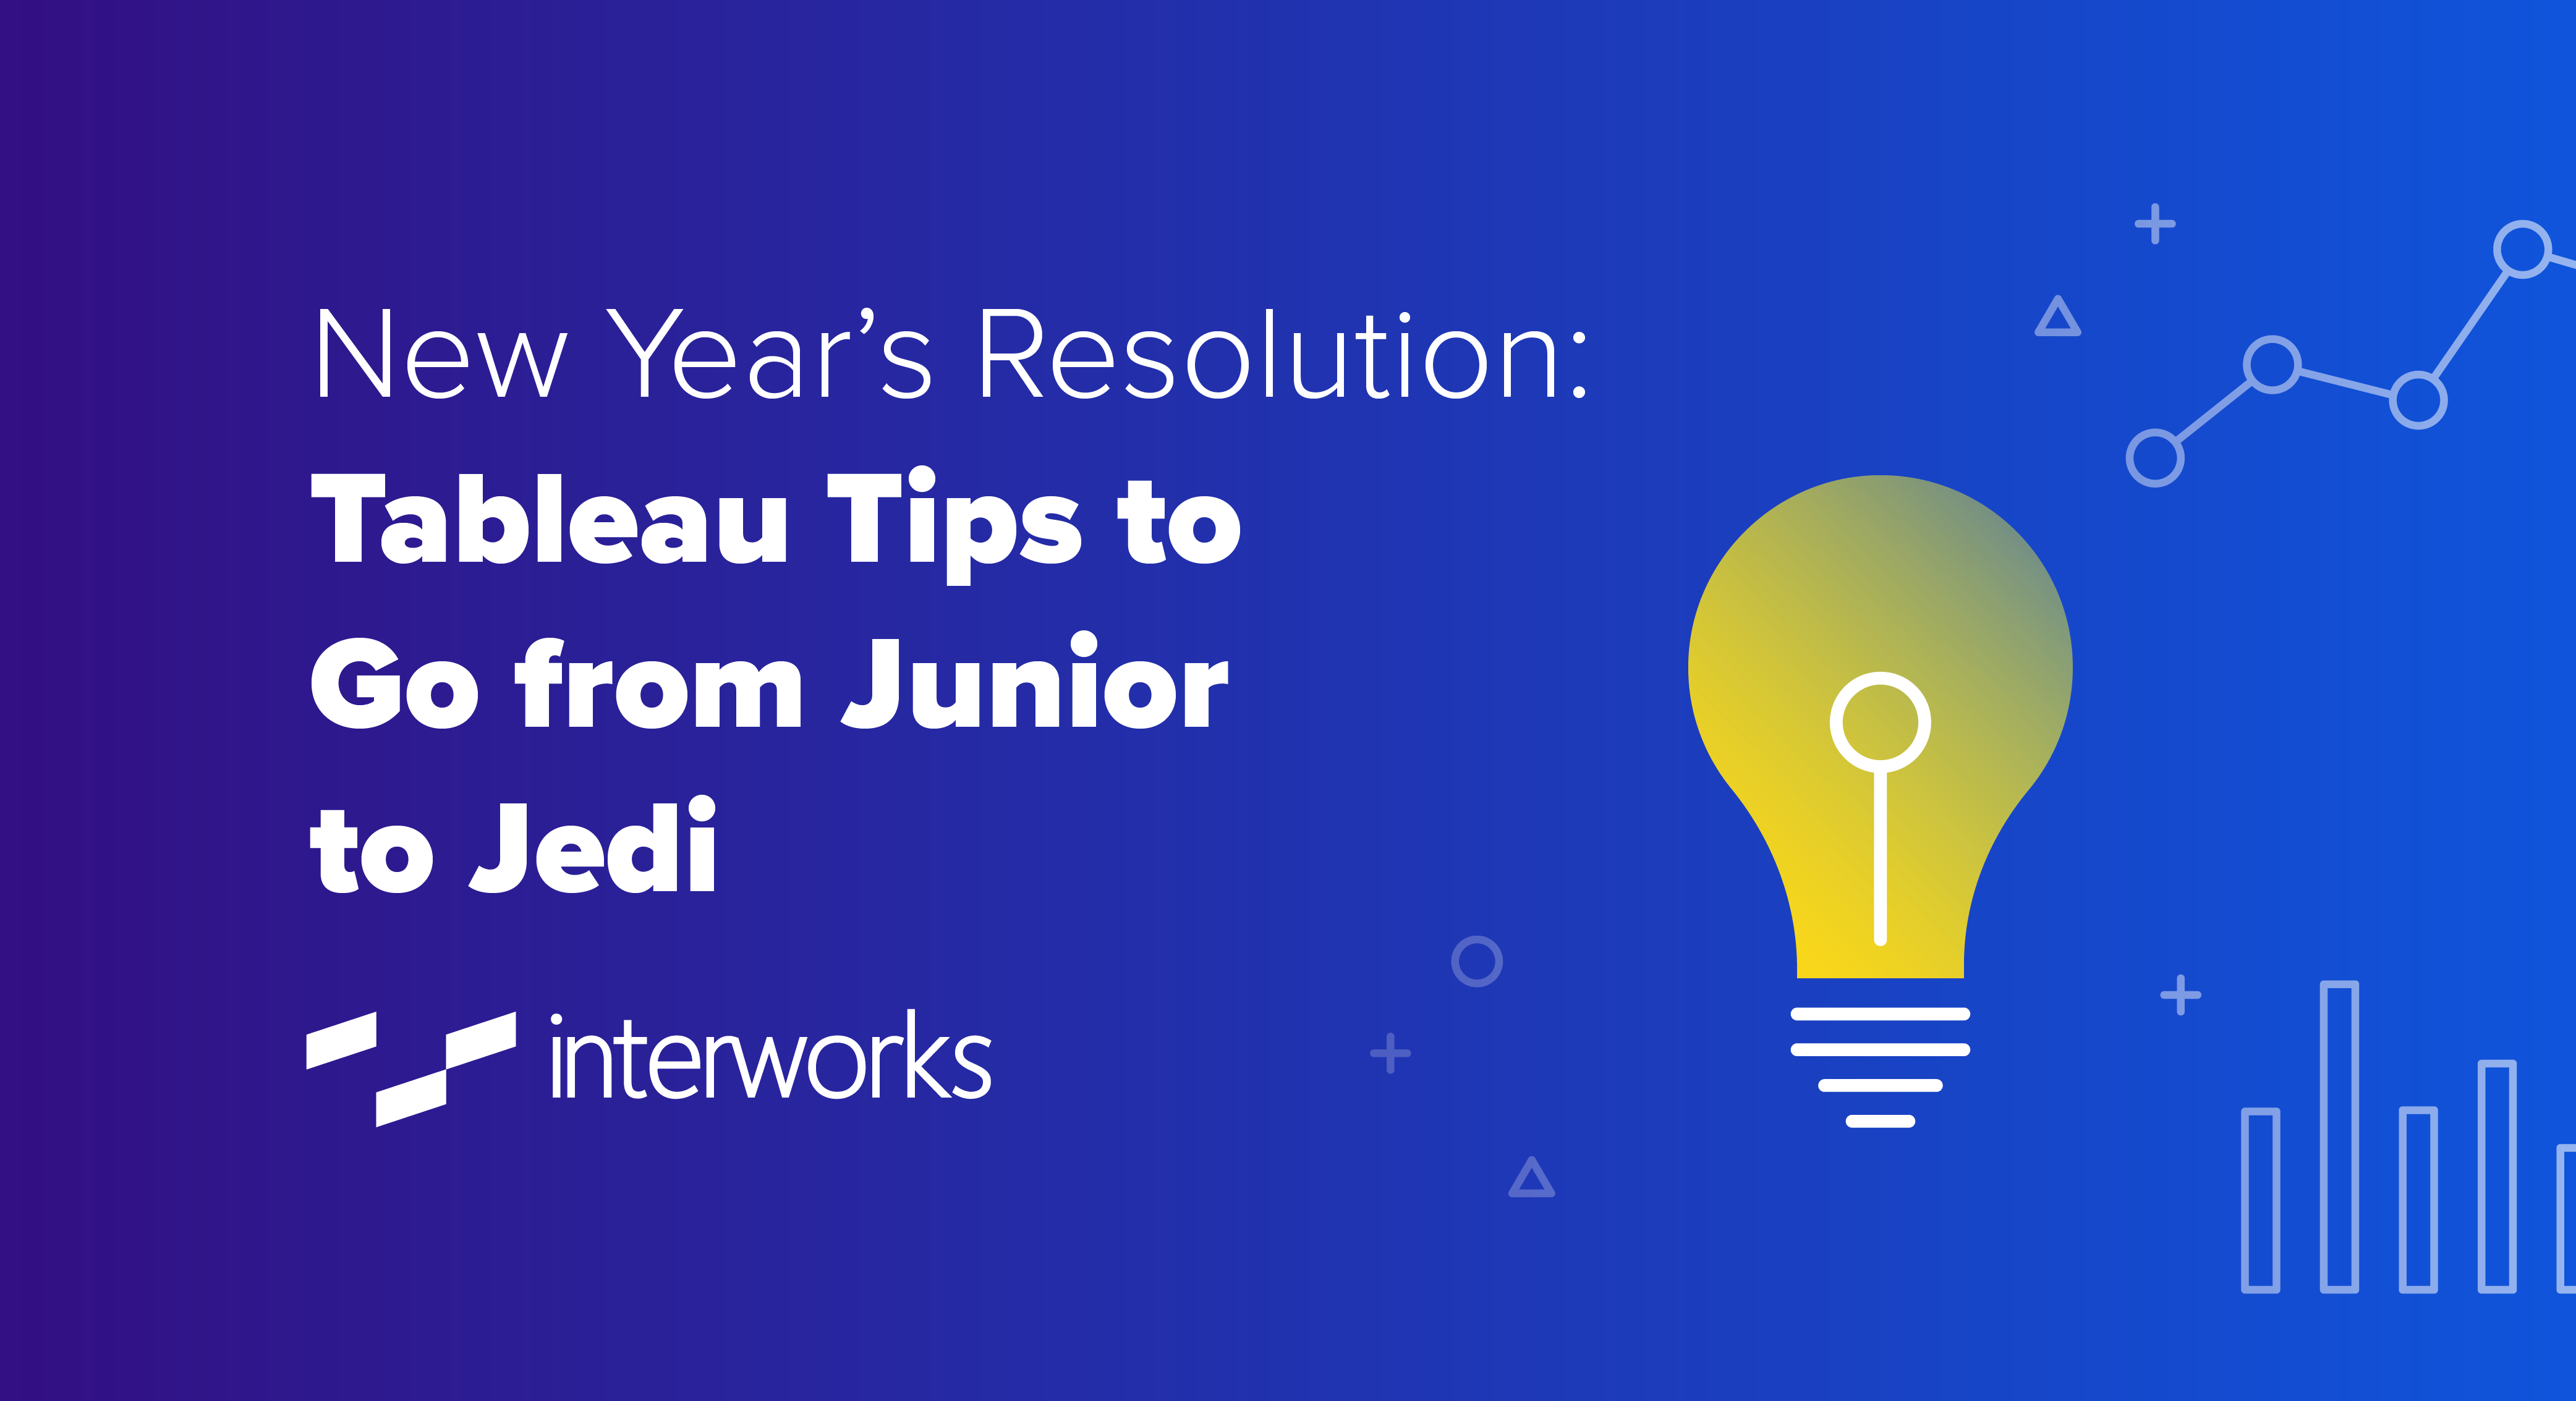 Tableau Tips to Go from Junior to Jedi